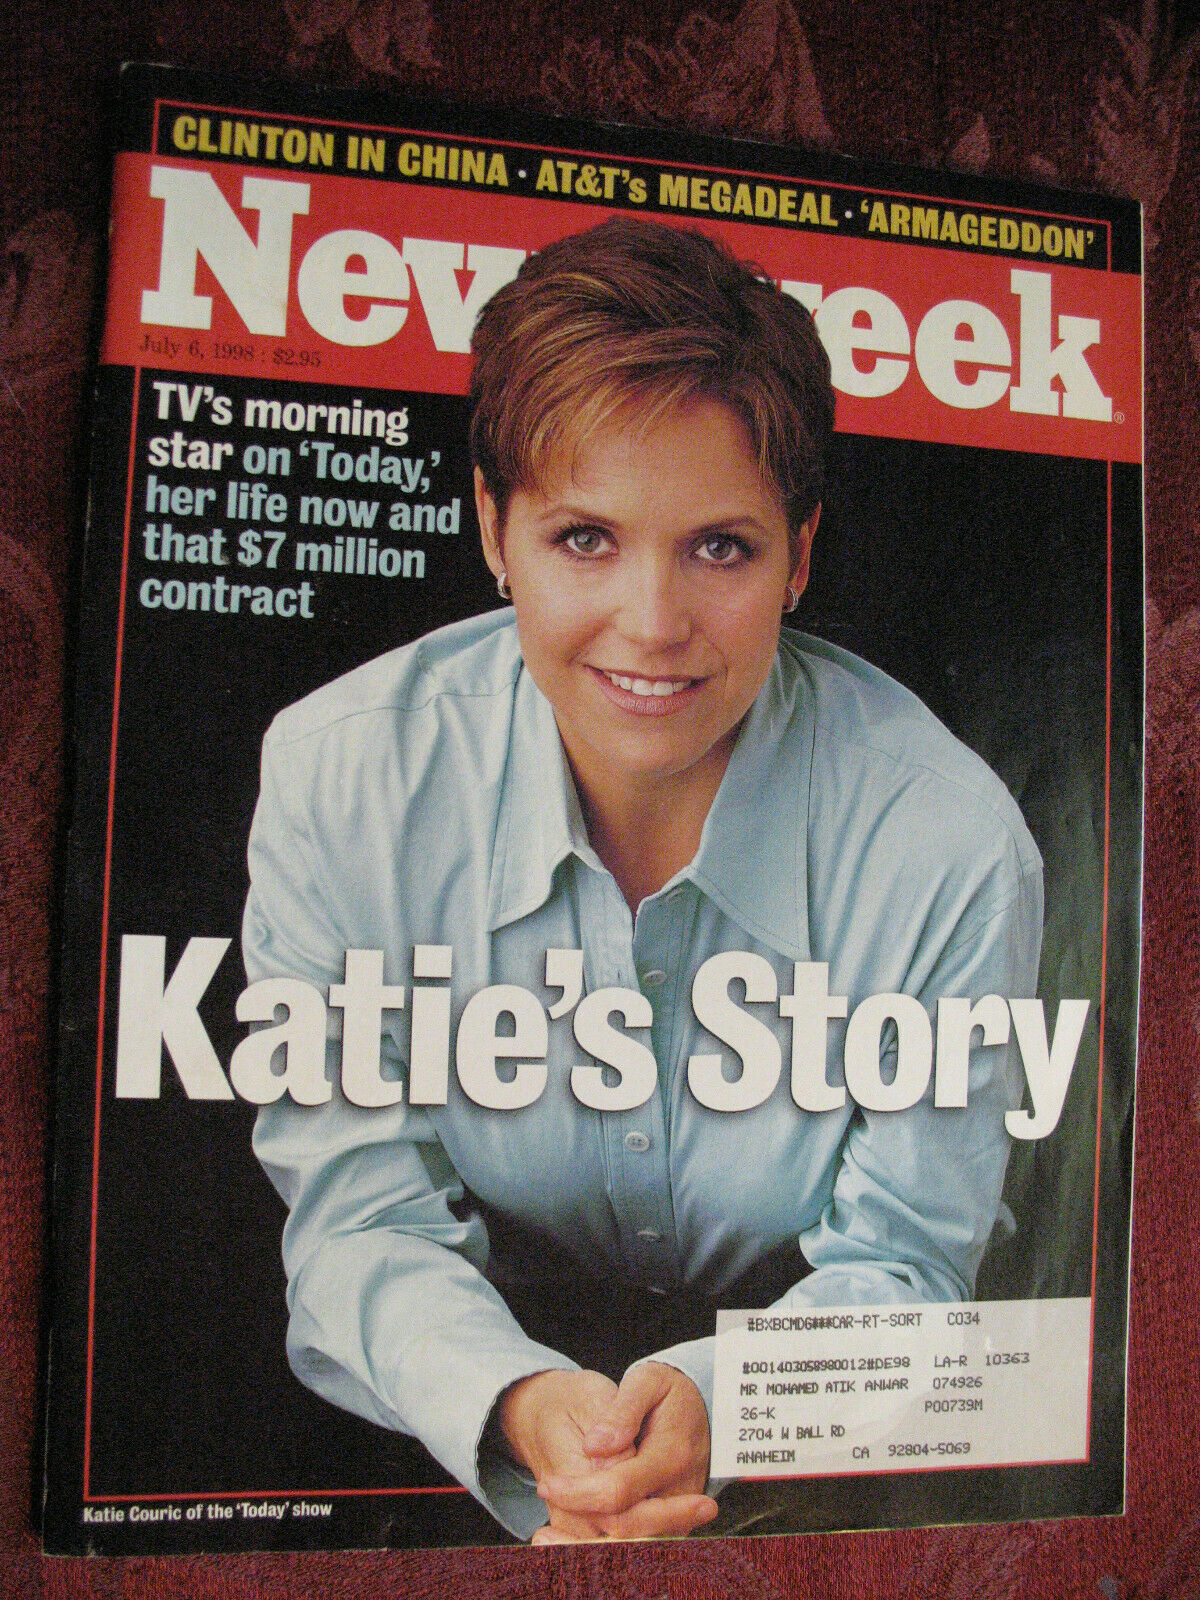 Primary image for NEWSWEEK July 6 1998 Katie Couric Today AT&T TCI Clinton Jiang China